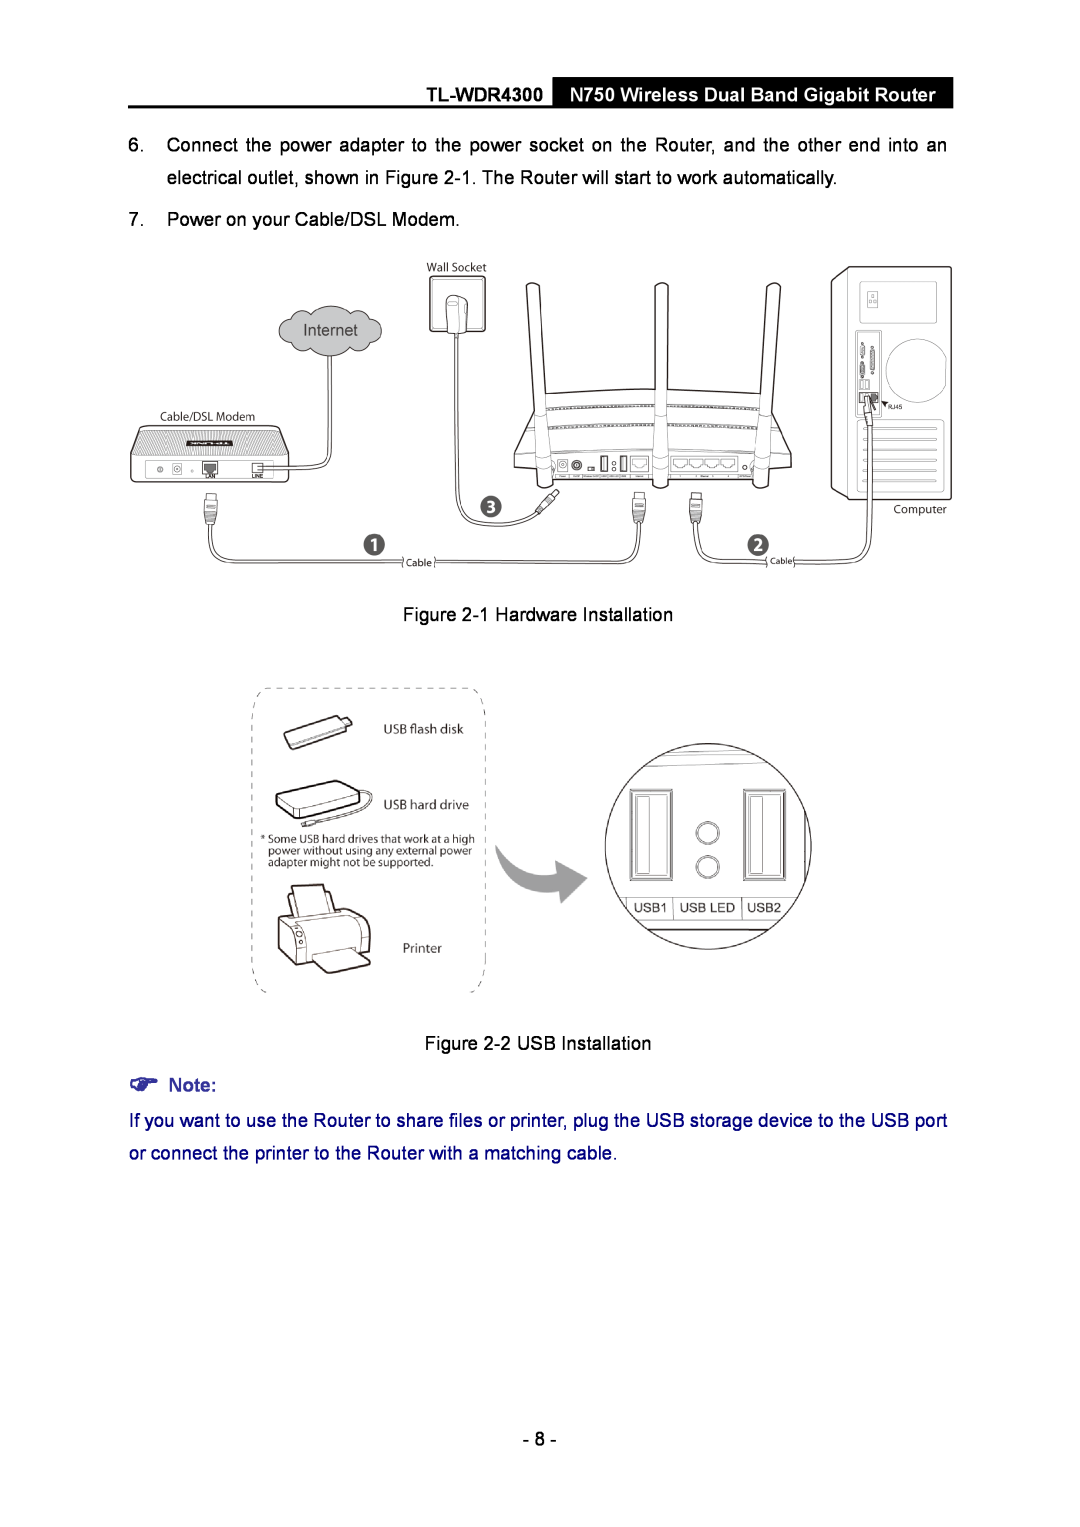 TP-Link manual TL-WDR4300 N750 Wireless Dual Band Gigabit Router, Power on your Cable/DSL Modem -1 Hardware Installation 